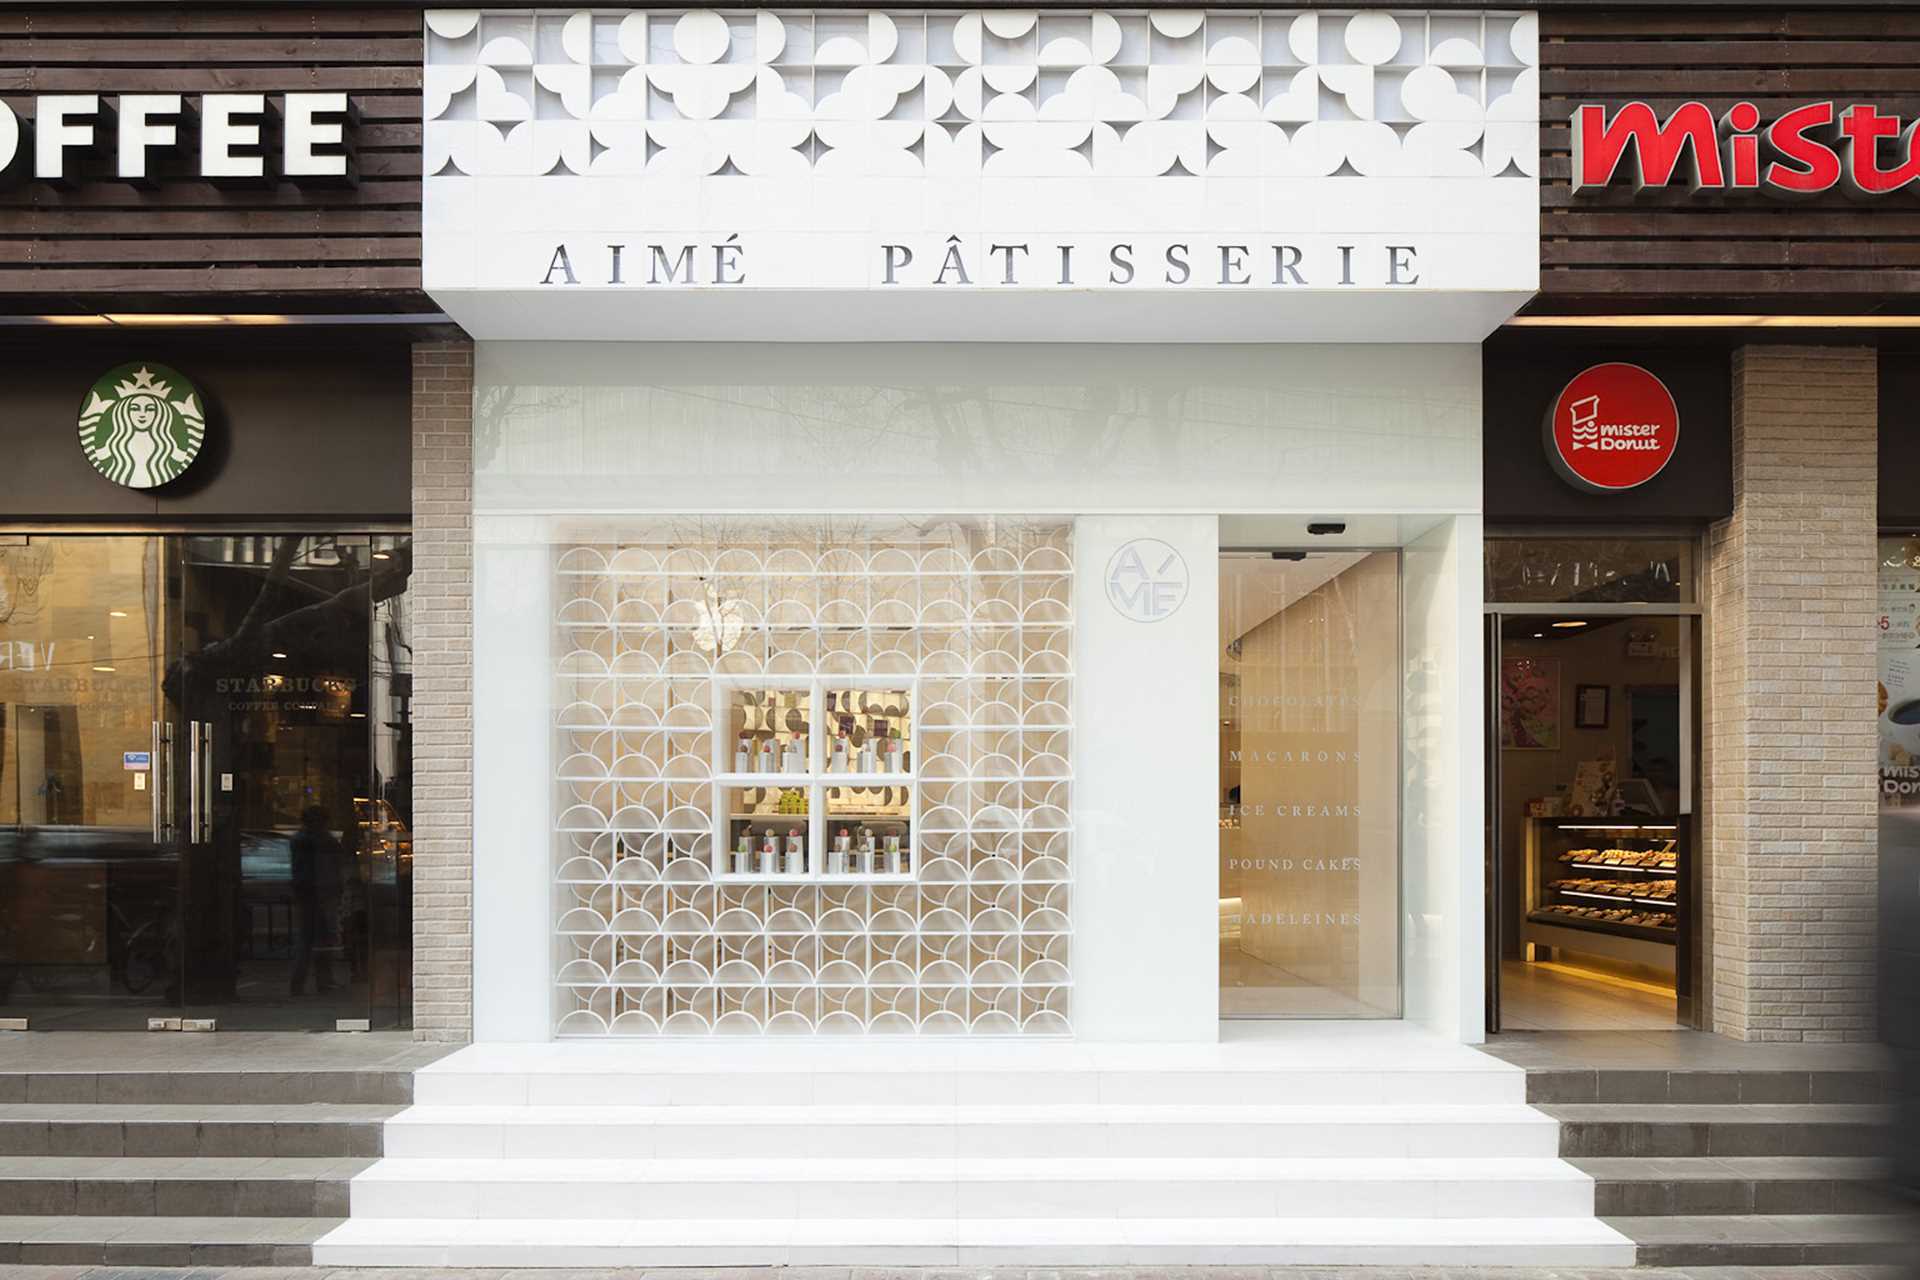 A modern patisserie with a white exterior, whose design is inspired by the act of opening one of the gift boxes that holds their colorful macarons.